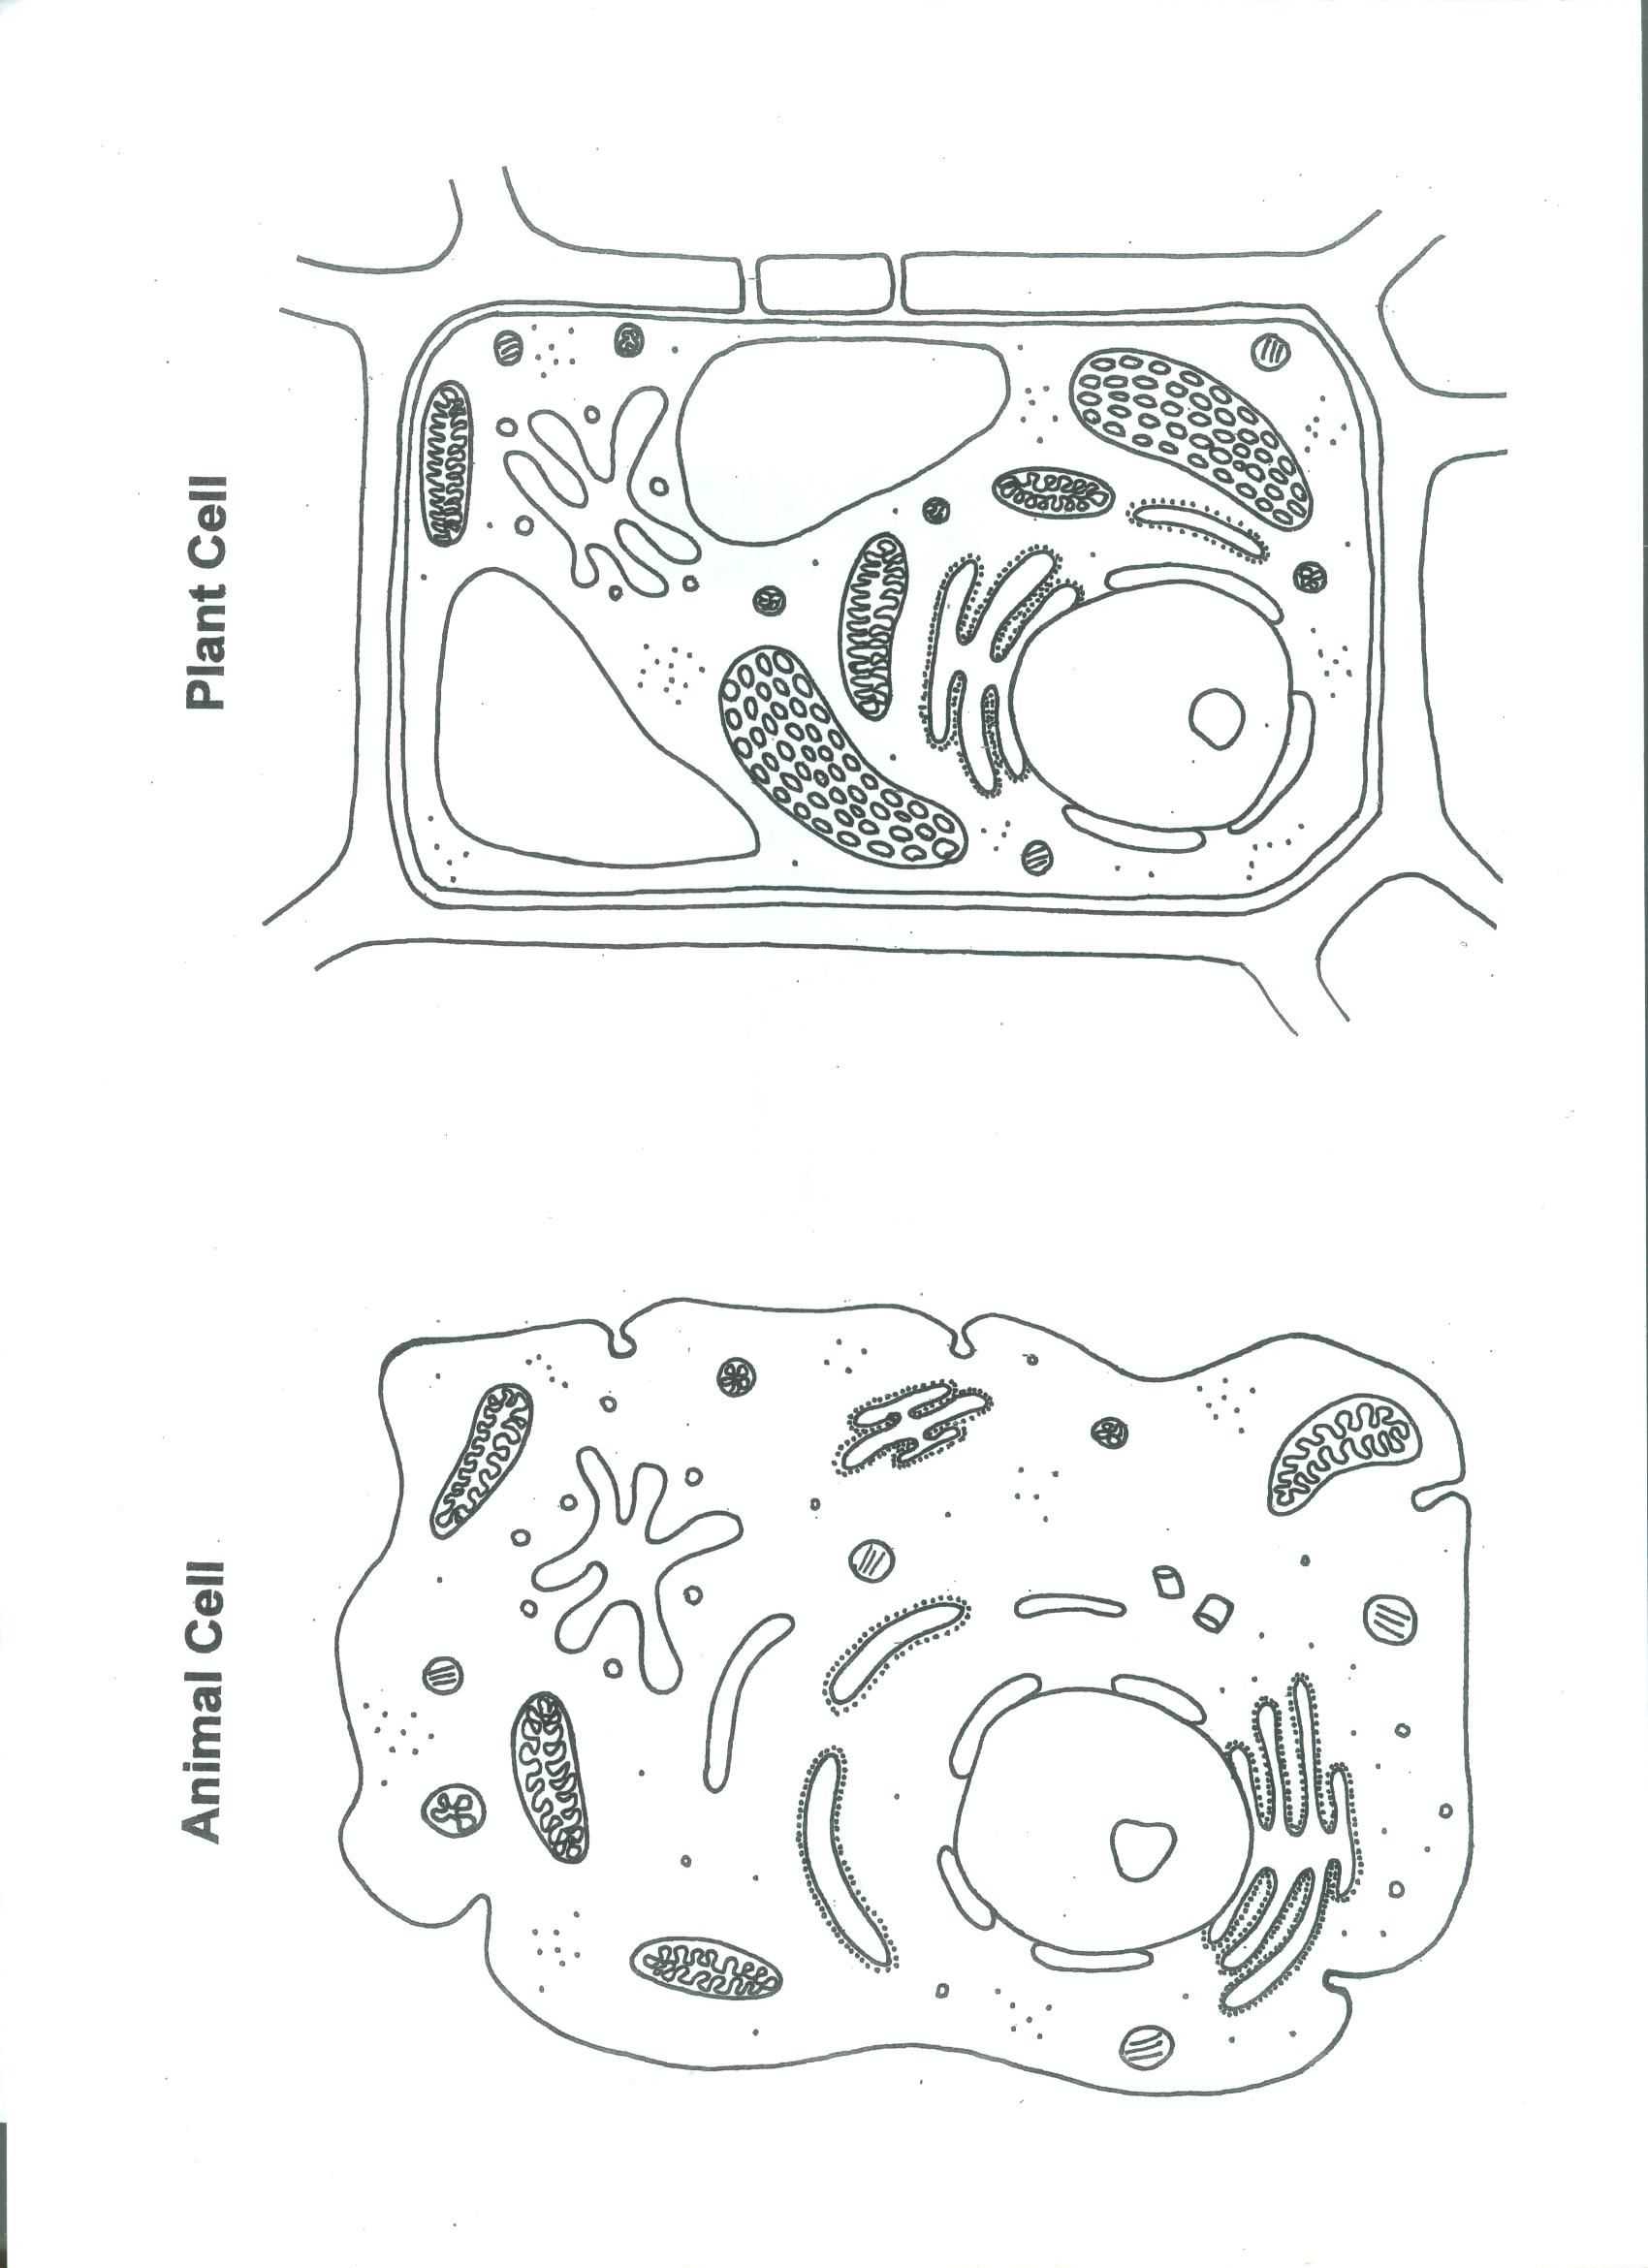 Dna Replication Coloring Worksheet Along with Printable Plant and Animal Cell